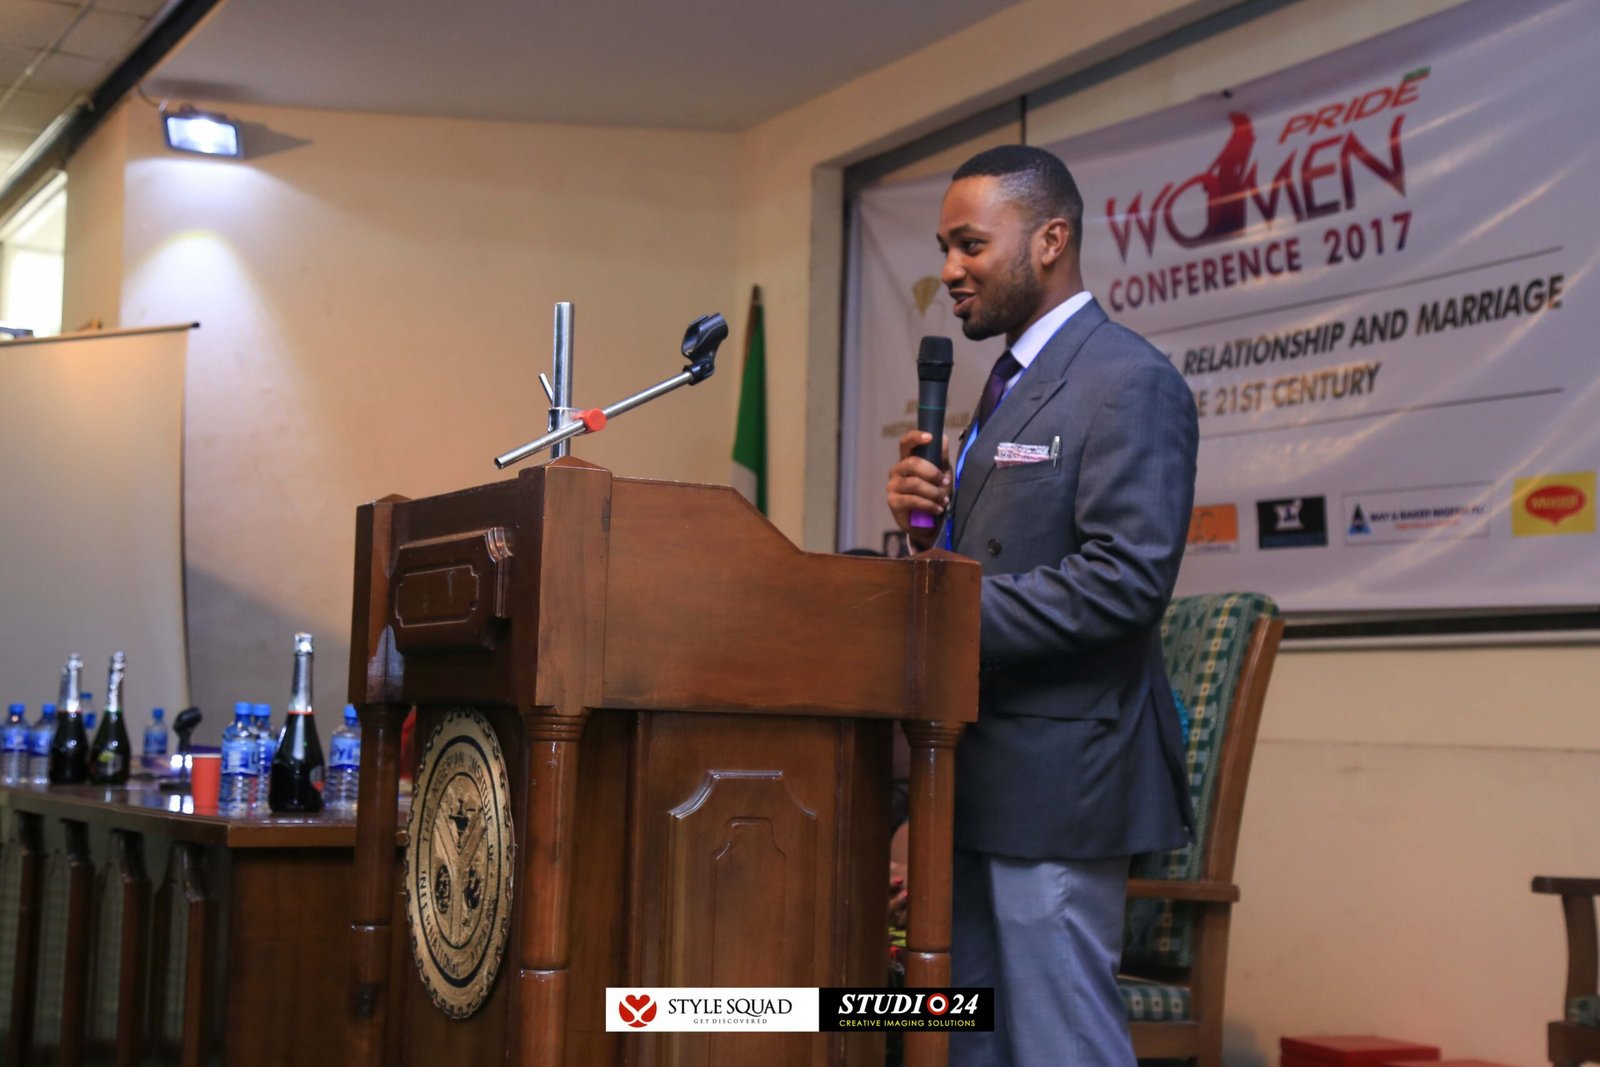 Pride Women Conference 2017 work women and marriage in the 21st century, Chukwuemeka Anyiam-Osigwe, the rare and & debonair gentleman, R&DG, Cmex A-O